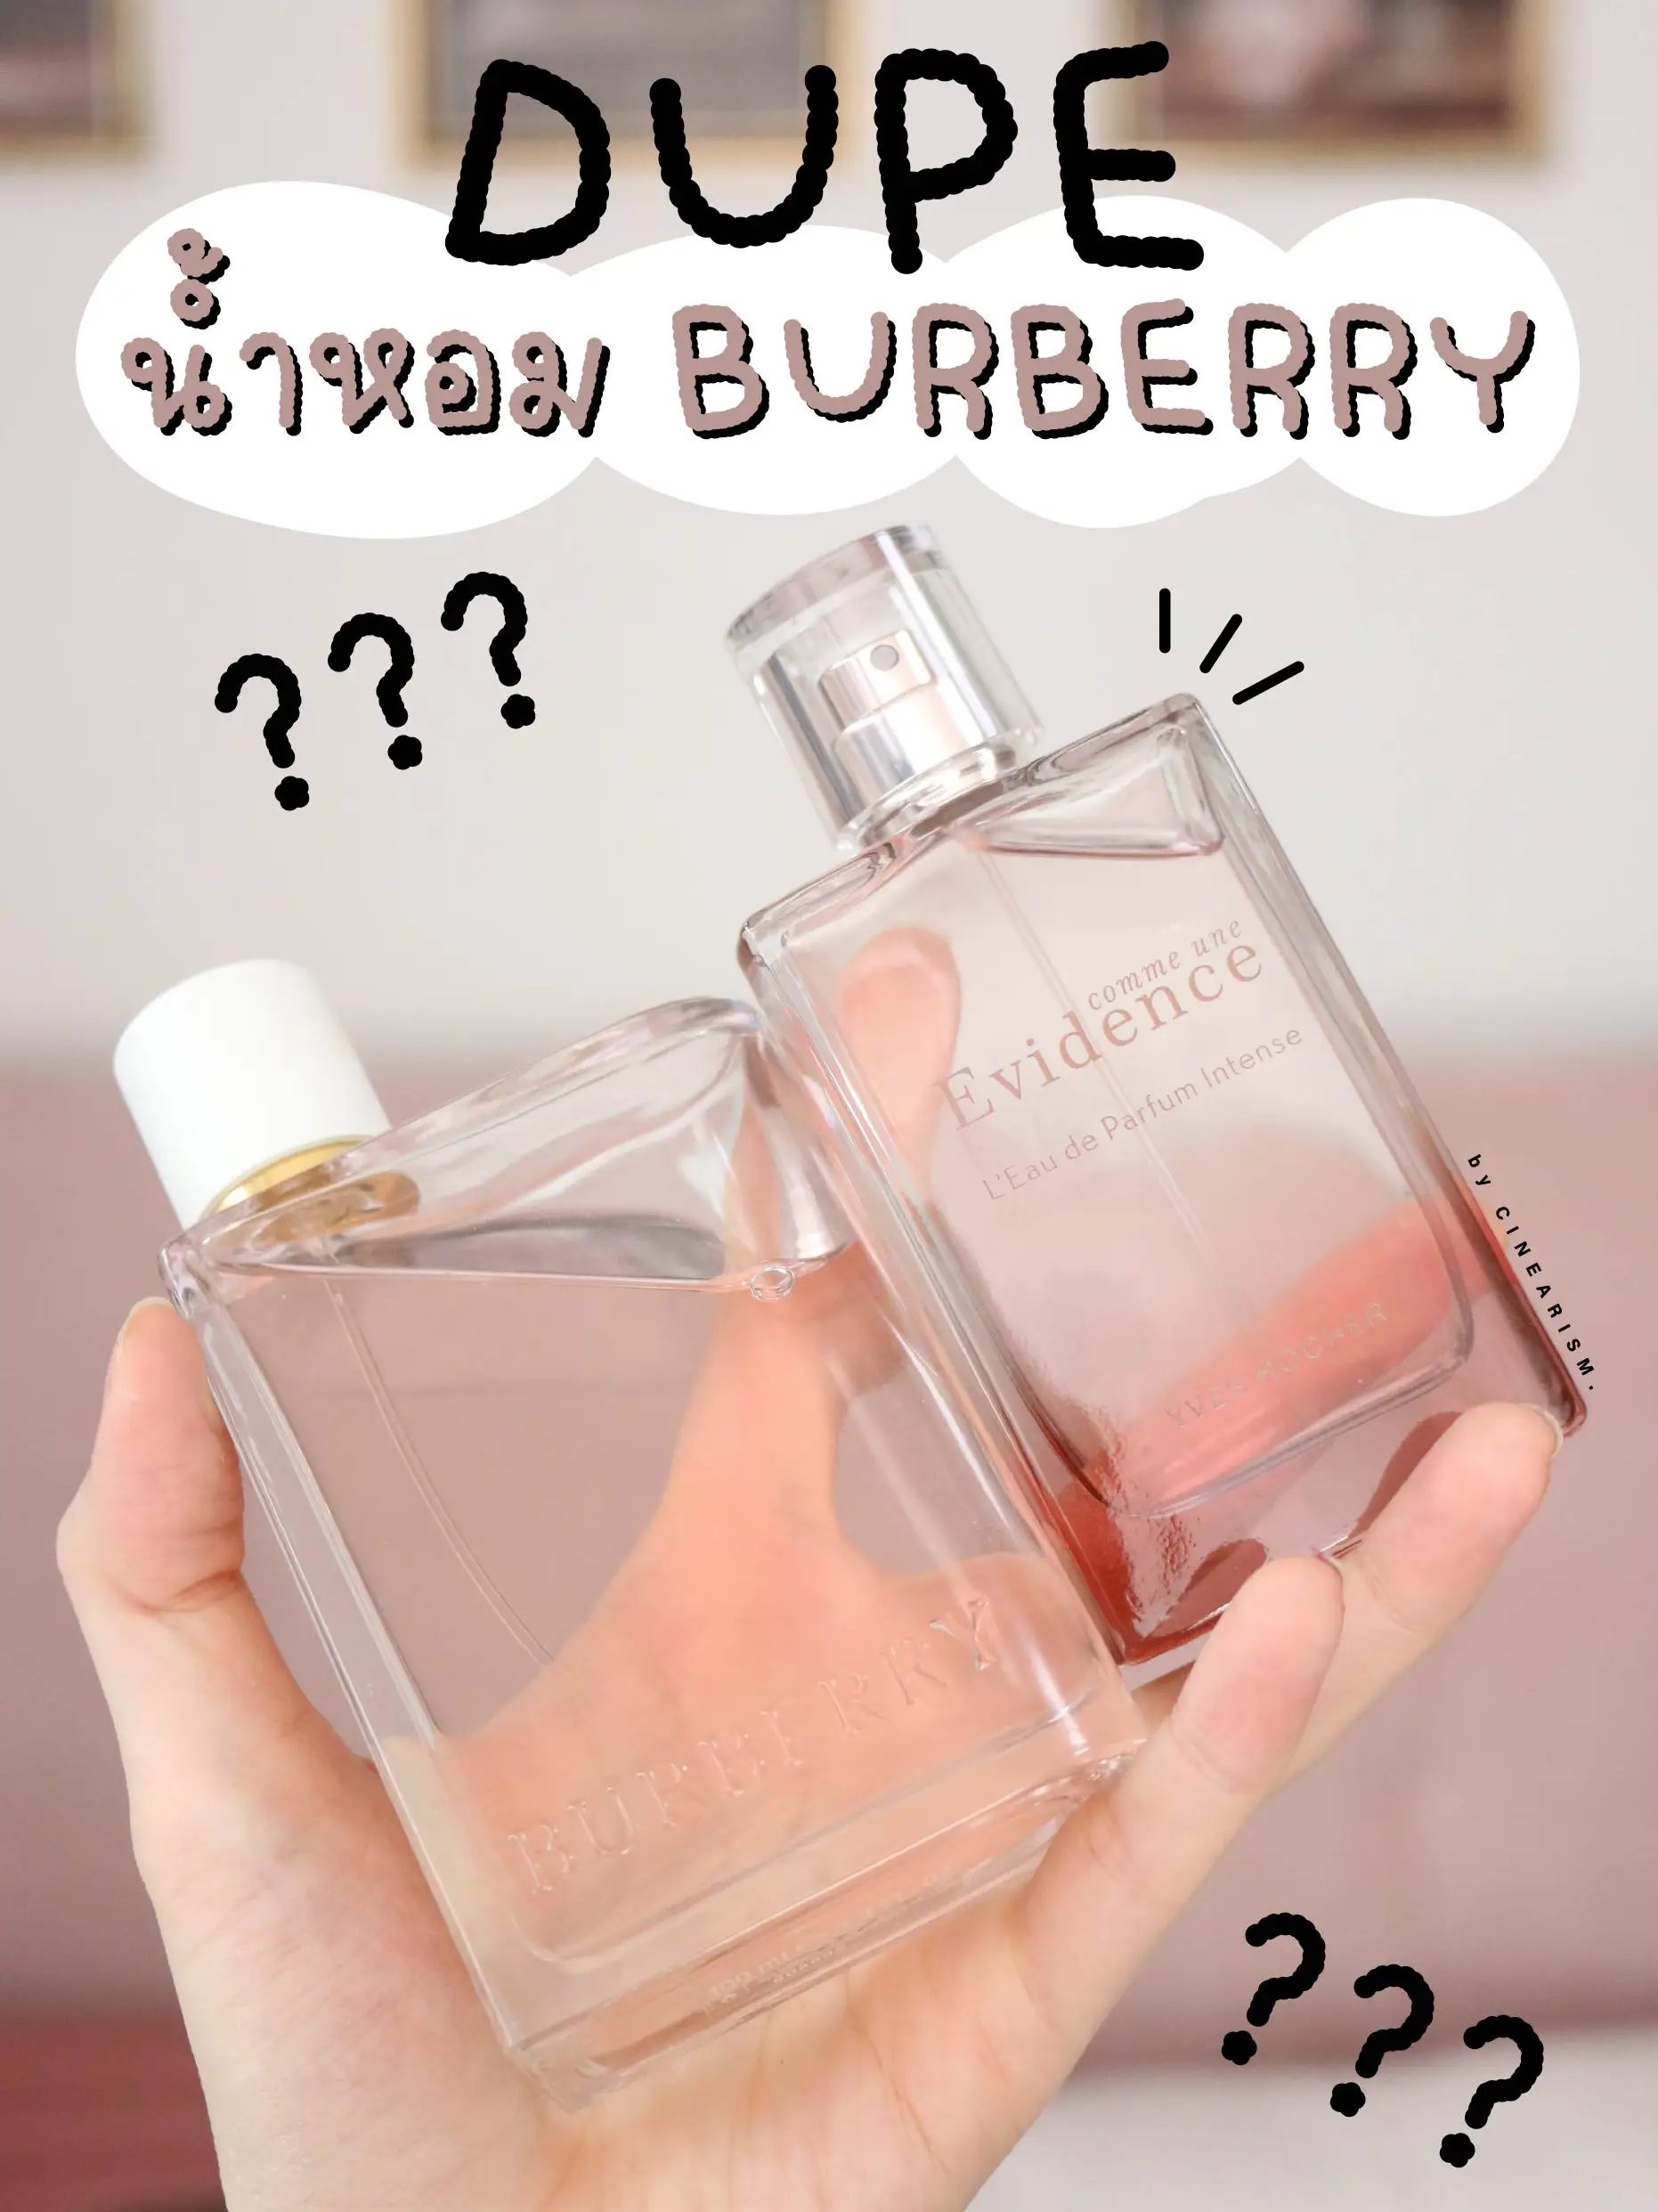 DUPE Burberry her blossom?กลิ่นคล้ายมากกก | Gallery posted by cinearism?  | Lemon8